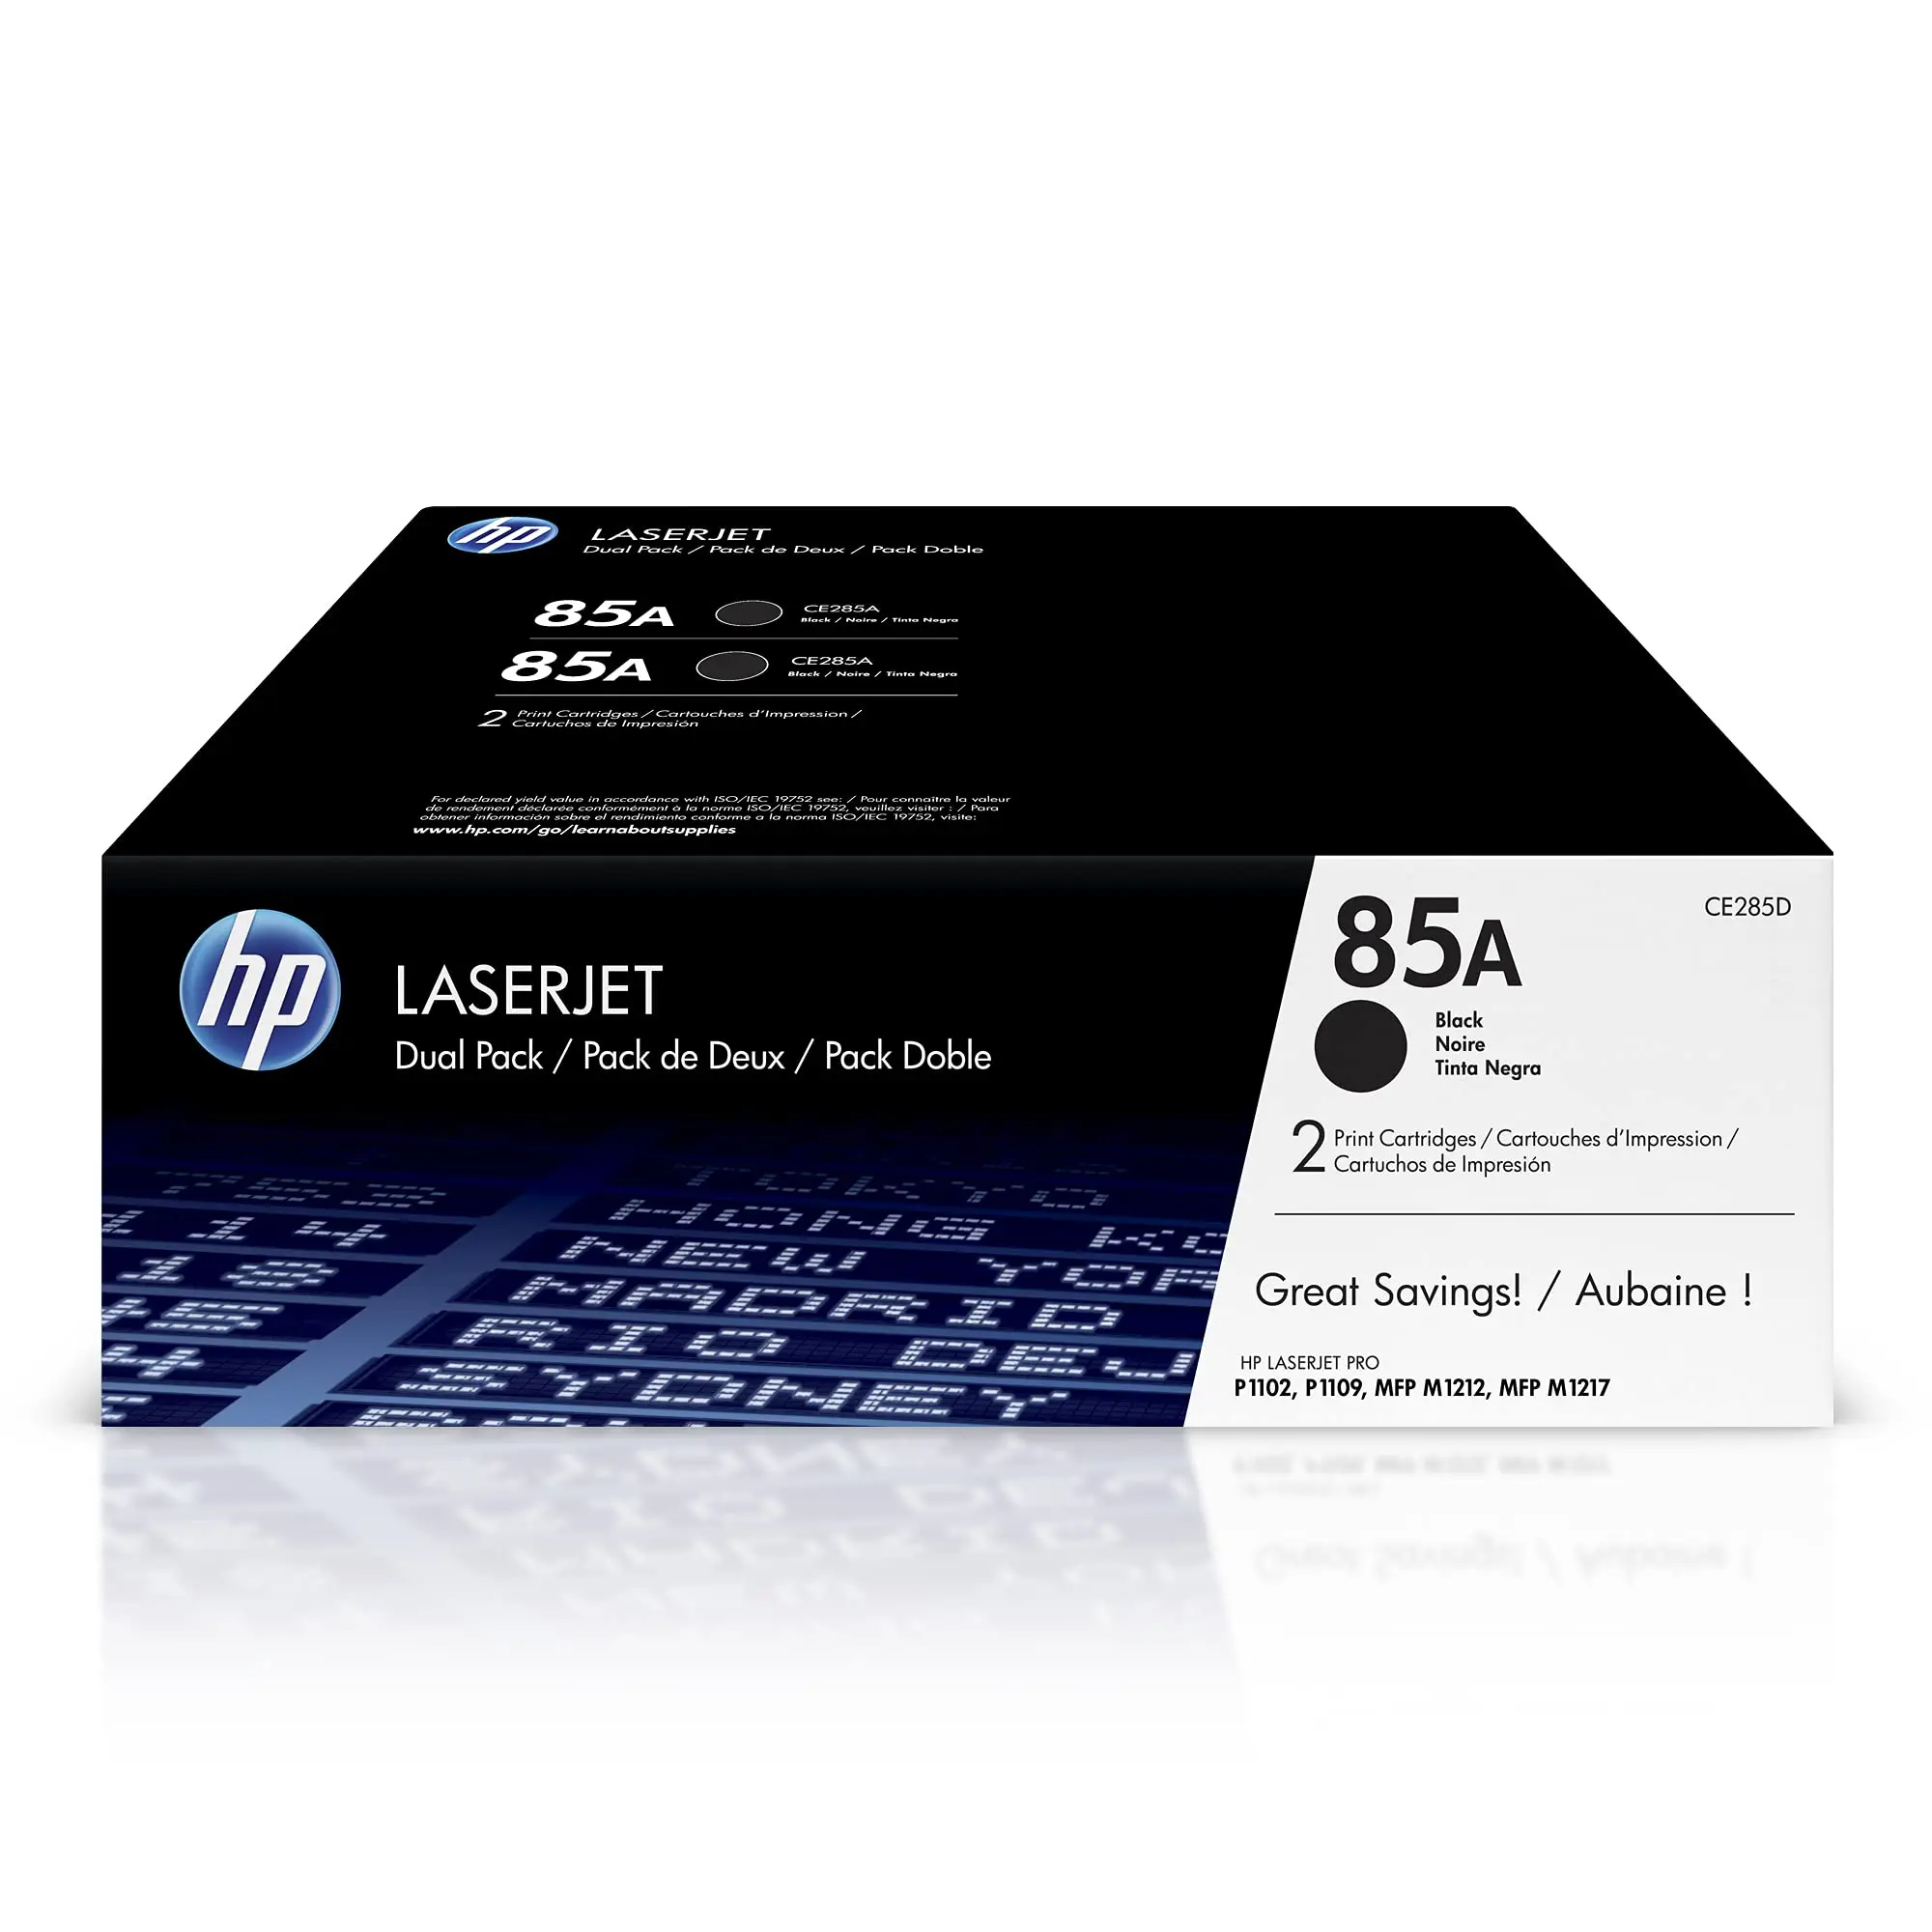 hewlett packard p1102 toner - What toner cartridges are compatible with HP P1102